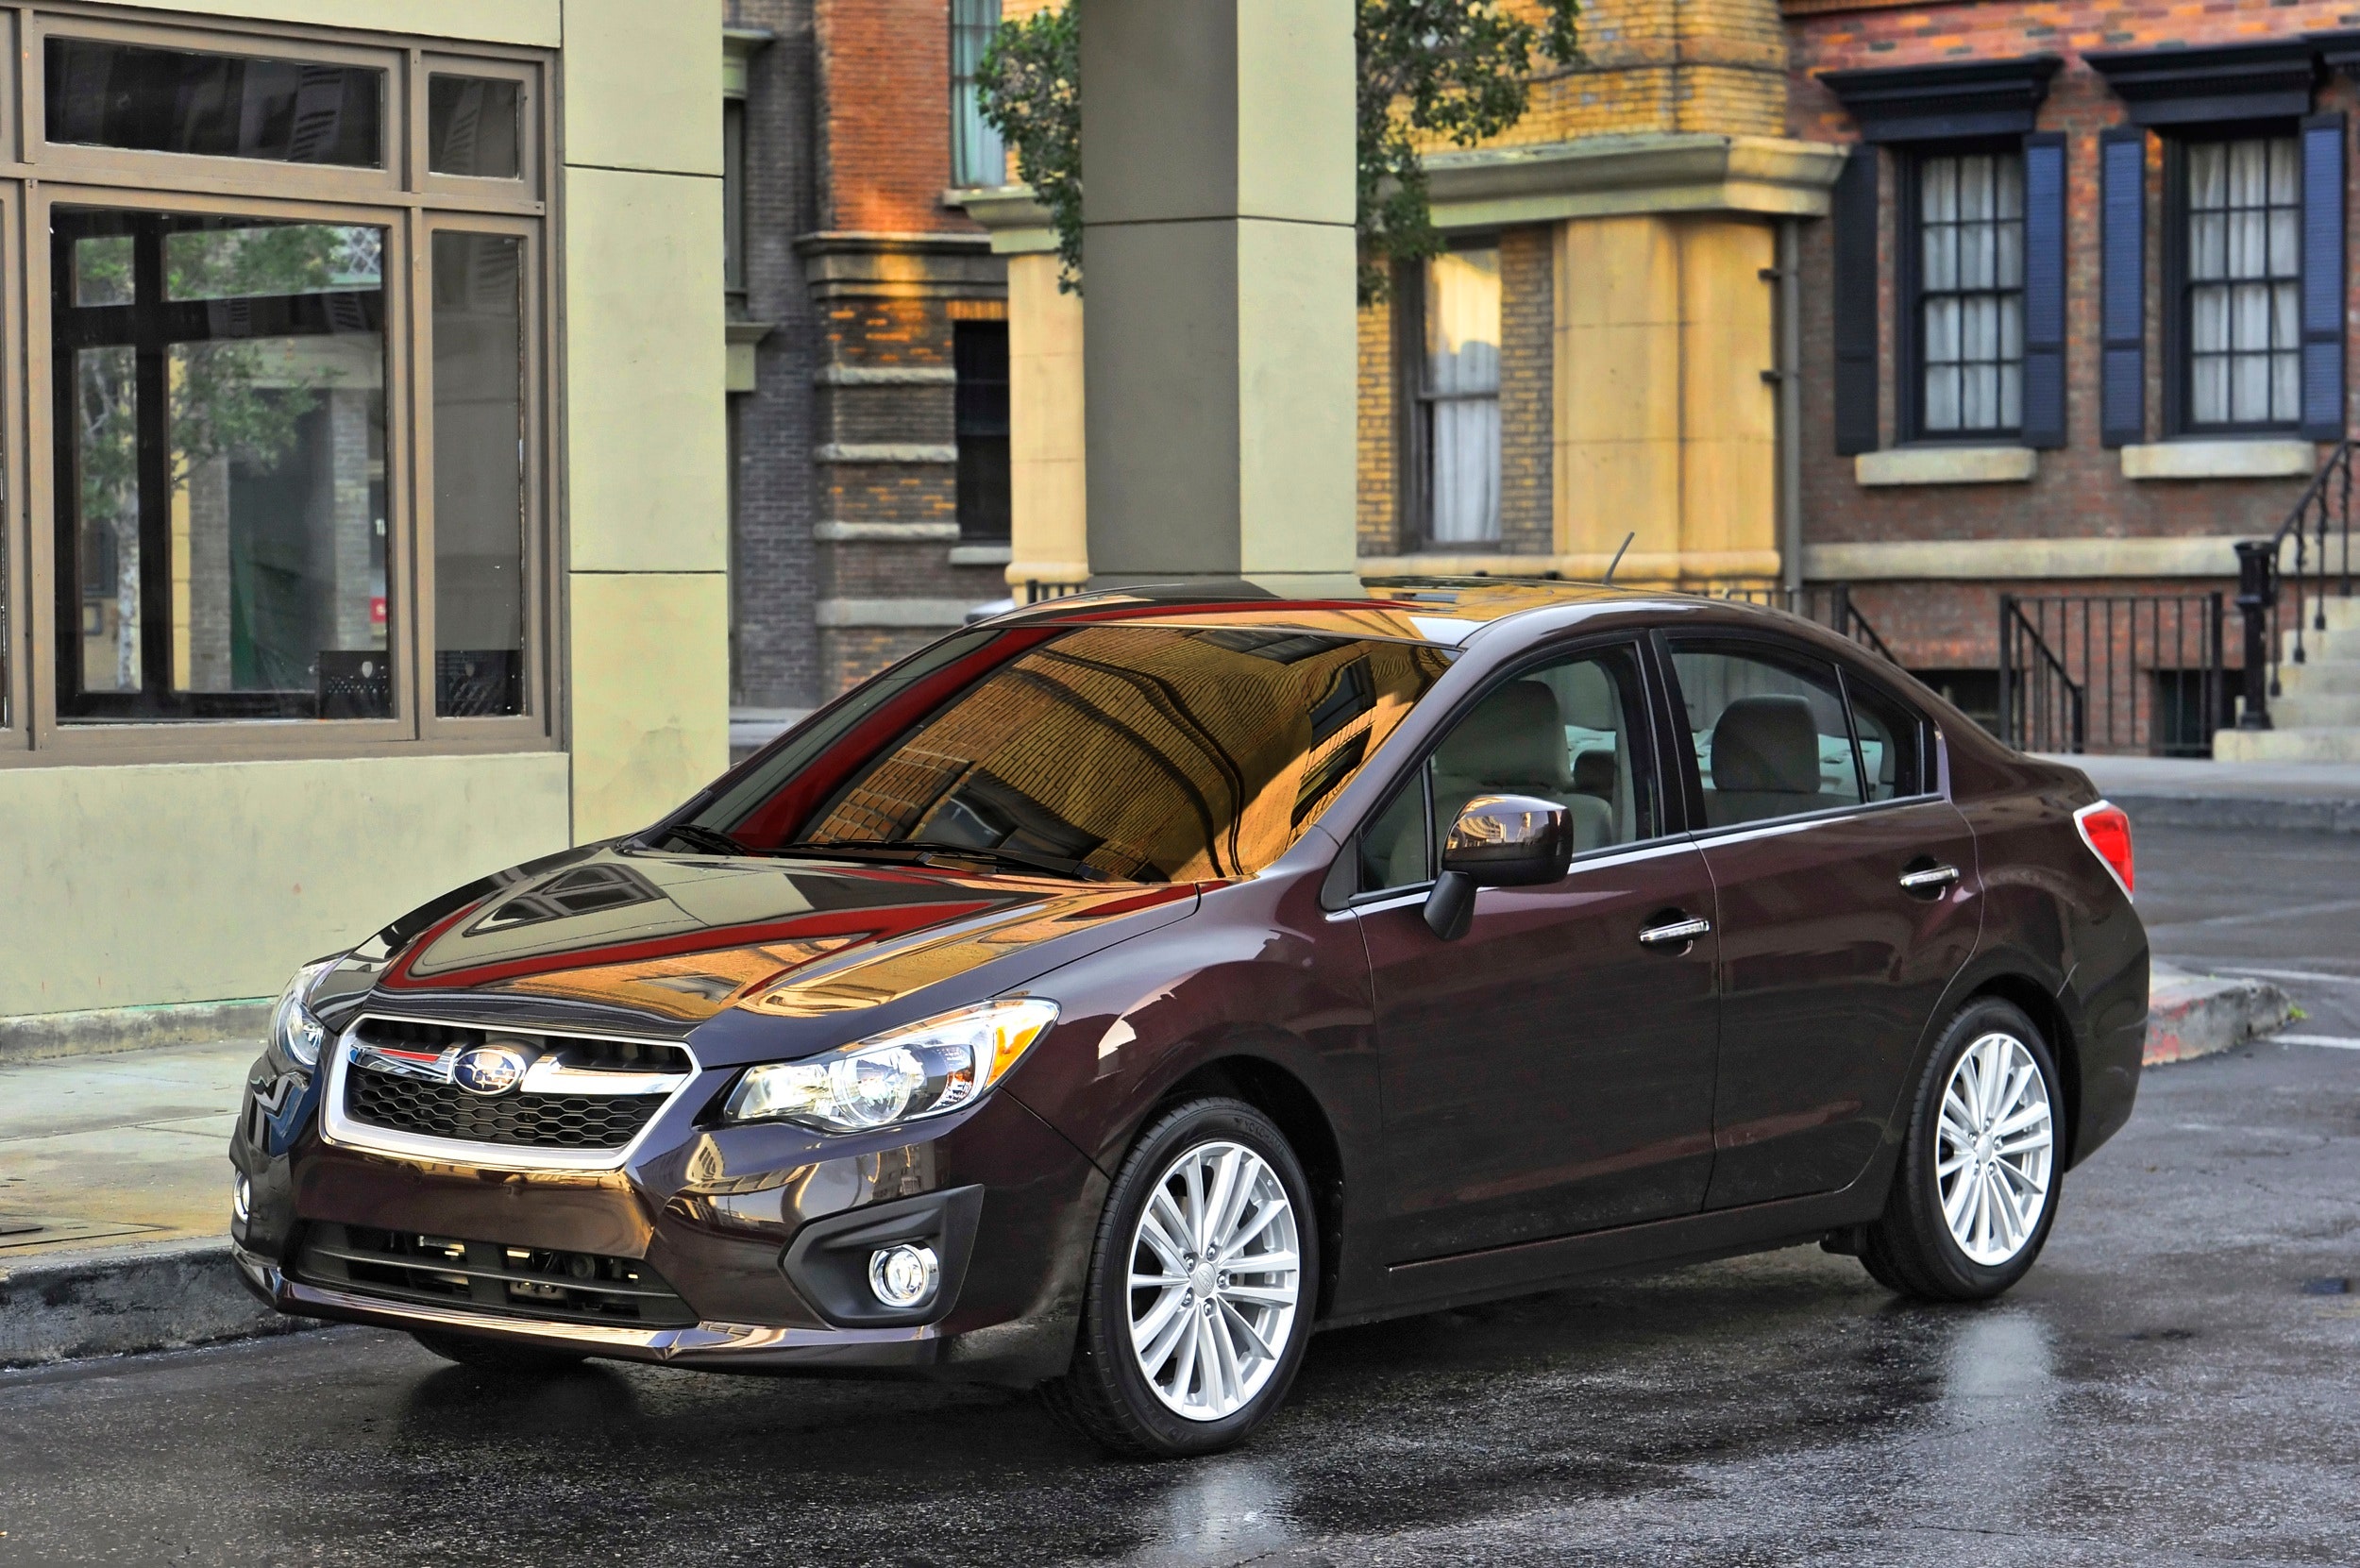 Why the 2012 Subaru Impreza is the Best Car on the Market